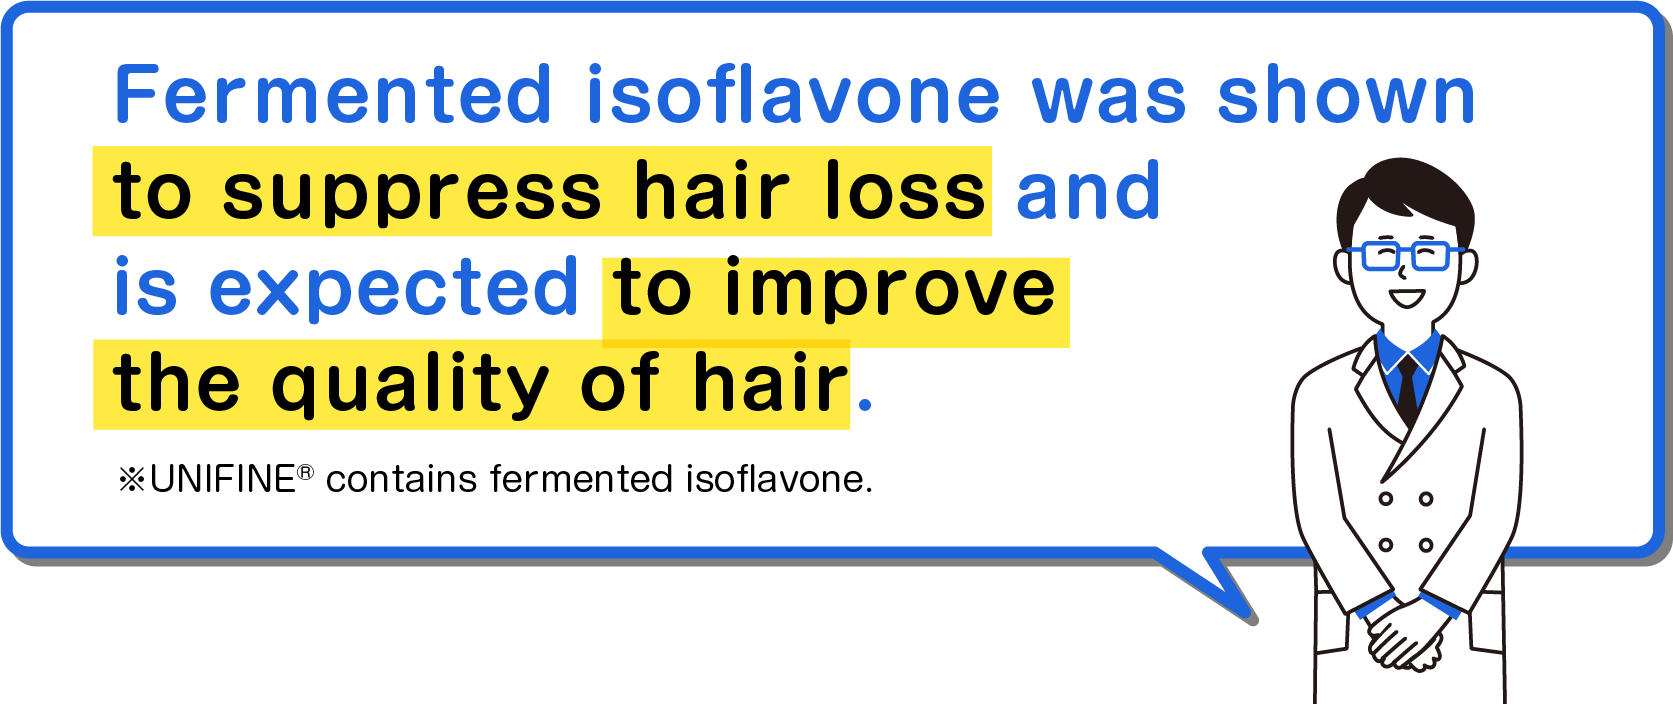 Fermented isoflavone was shown to suppress hair loss and is expected to improve the quality of hair. * UNIFINE® contains fermented isoflavone.